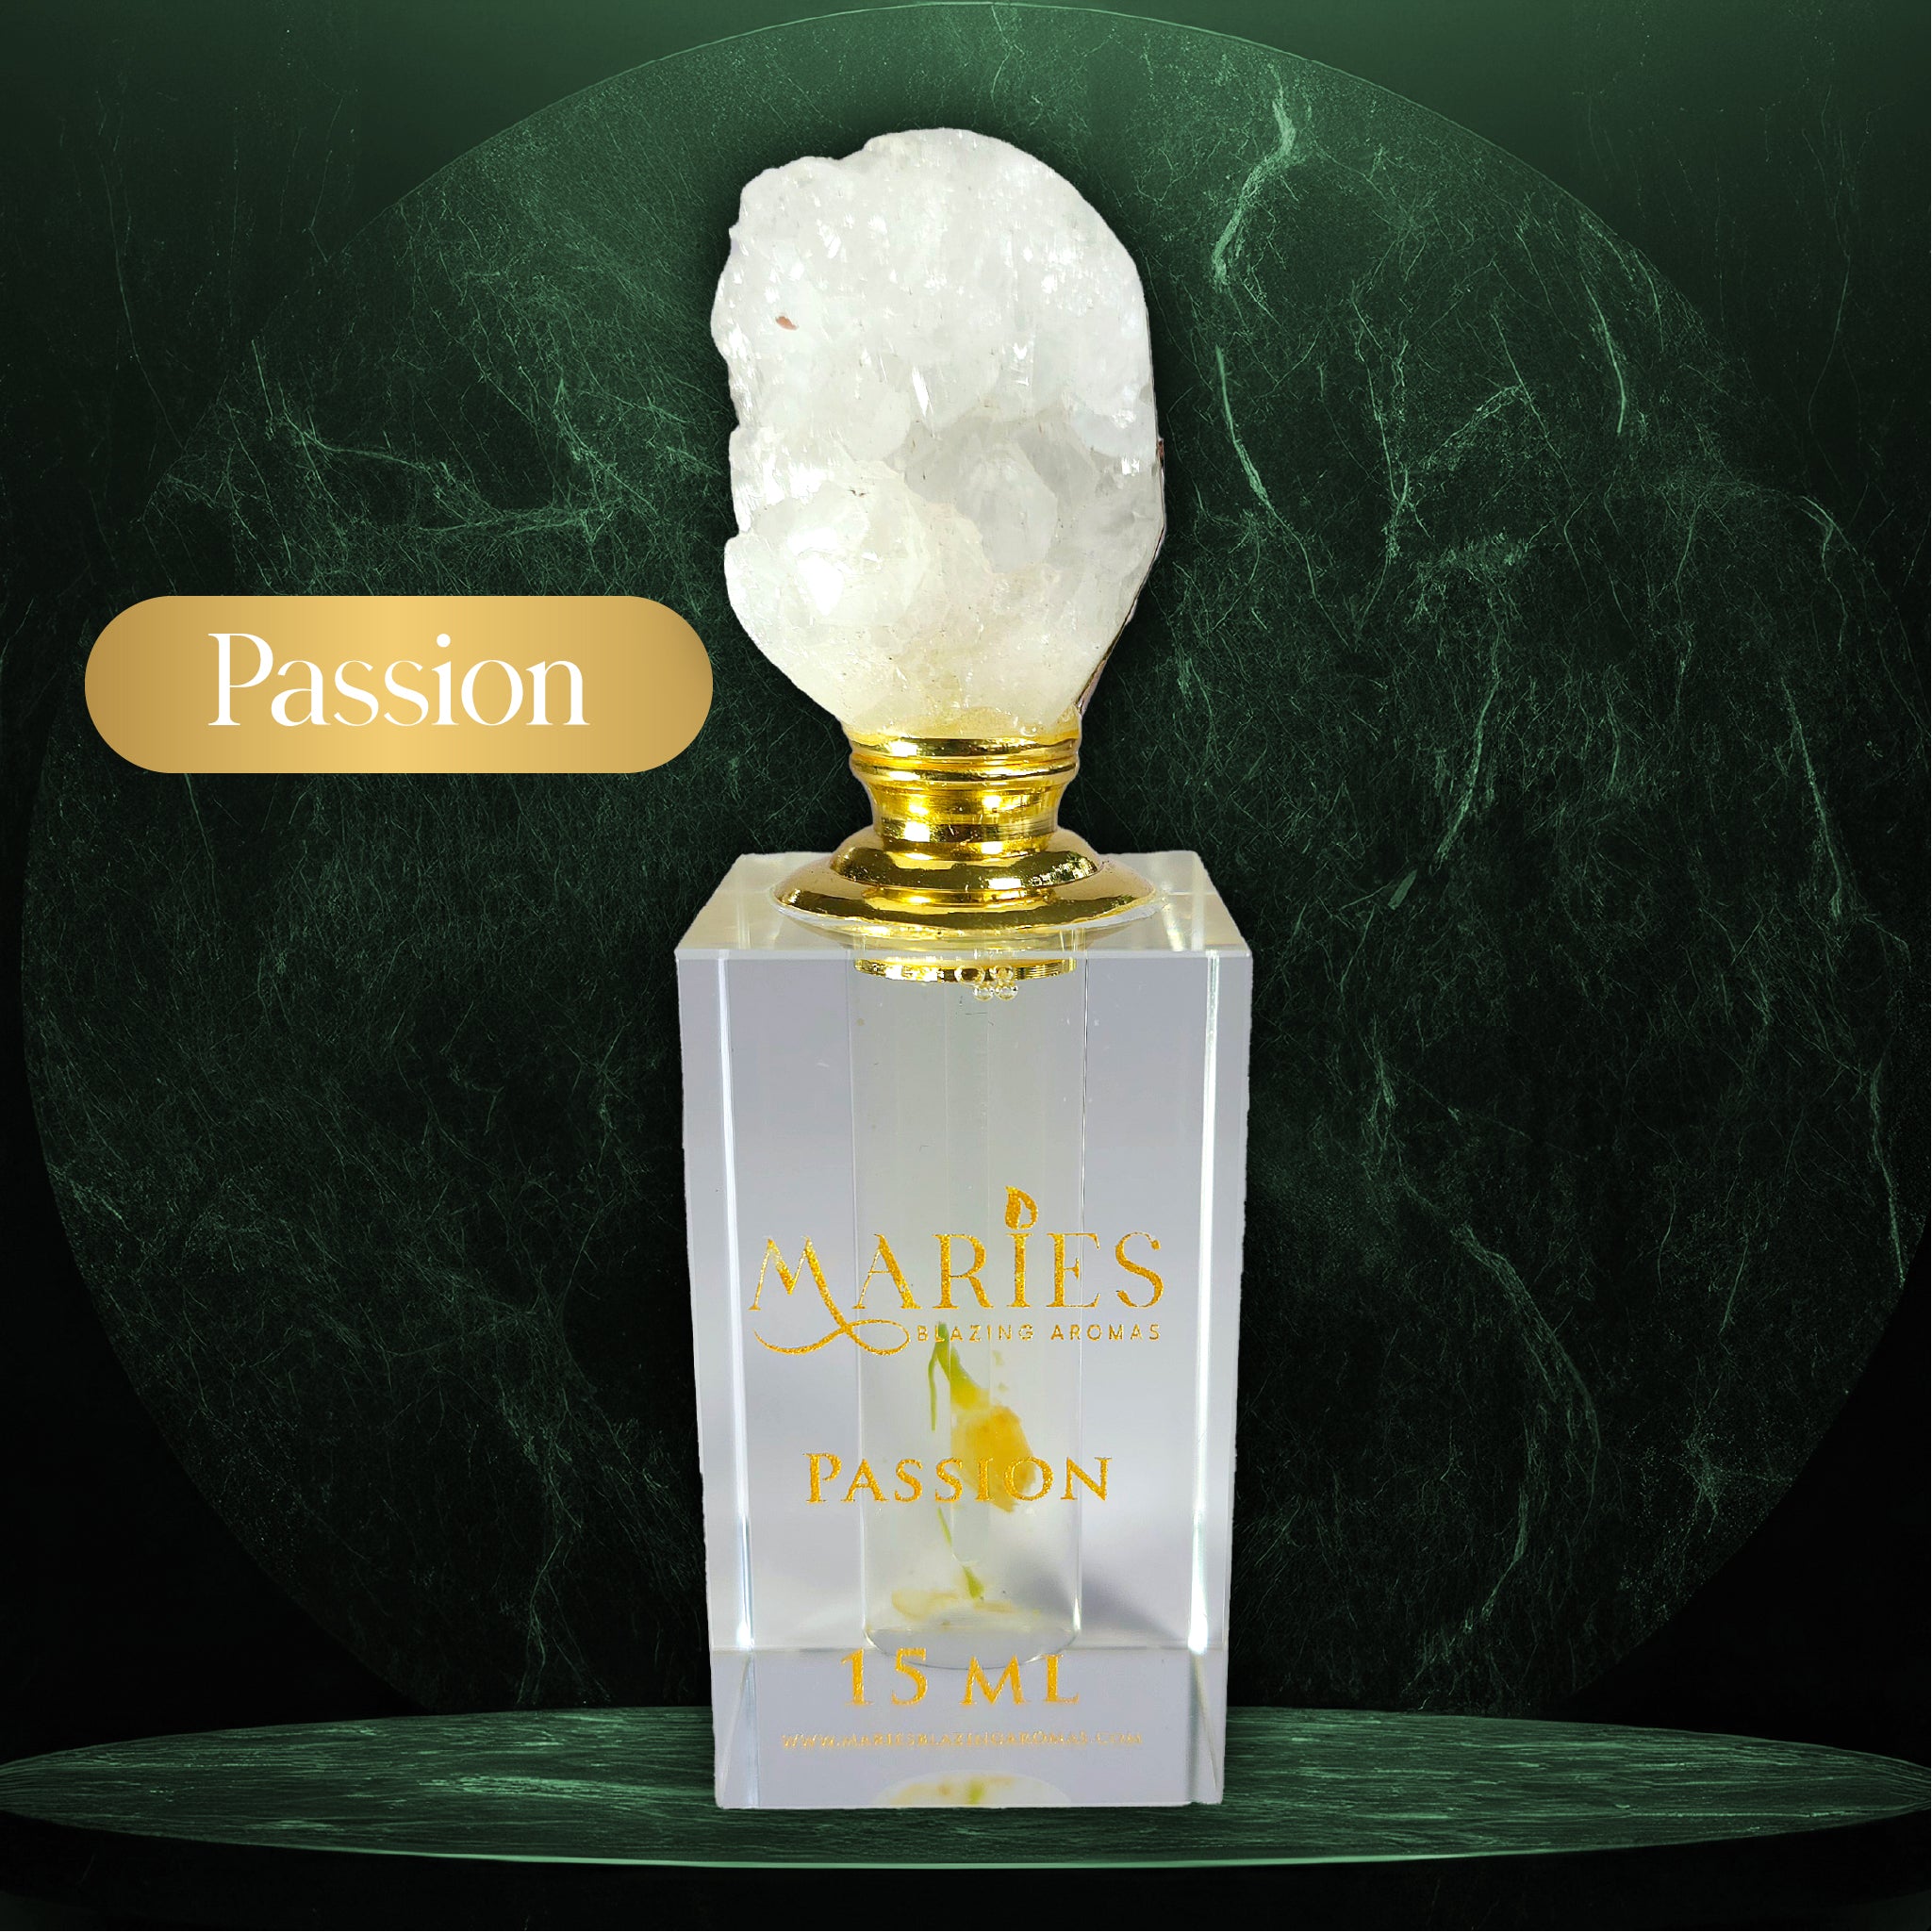 Elegant glass bottle of Passion Luxury Perfume Fragrance Oil by Maries Blazing Aromas